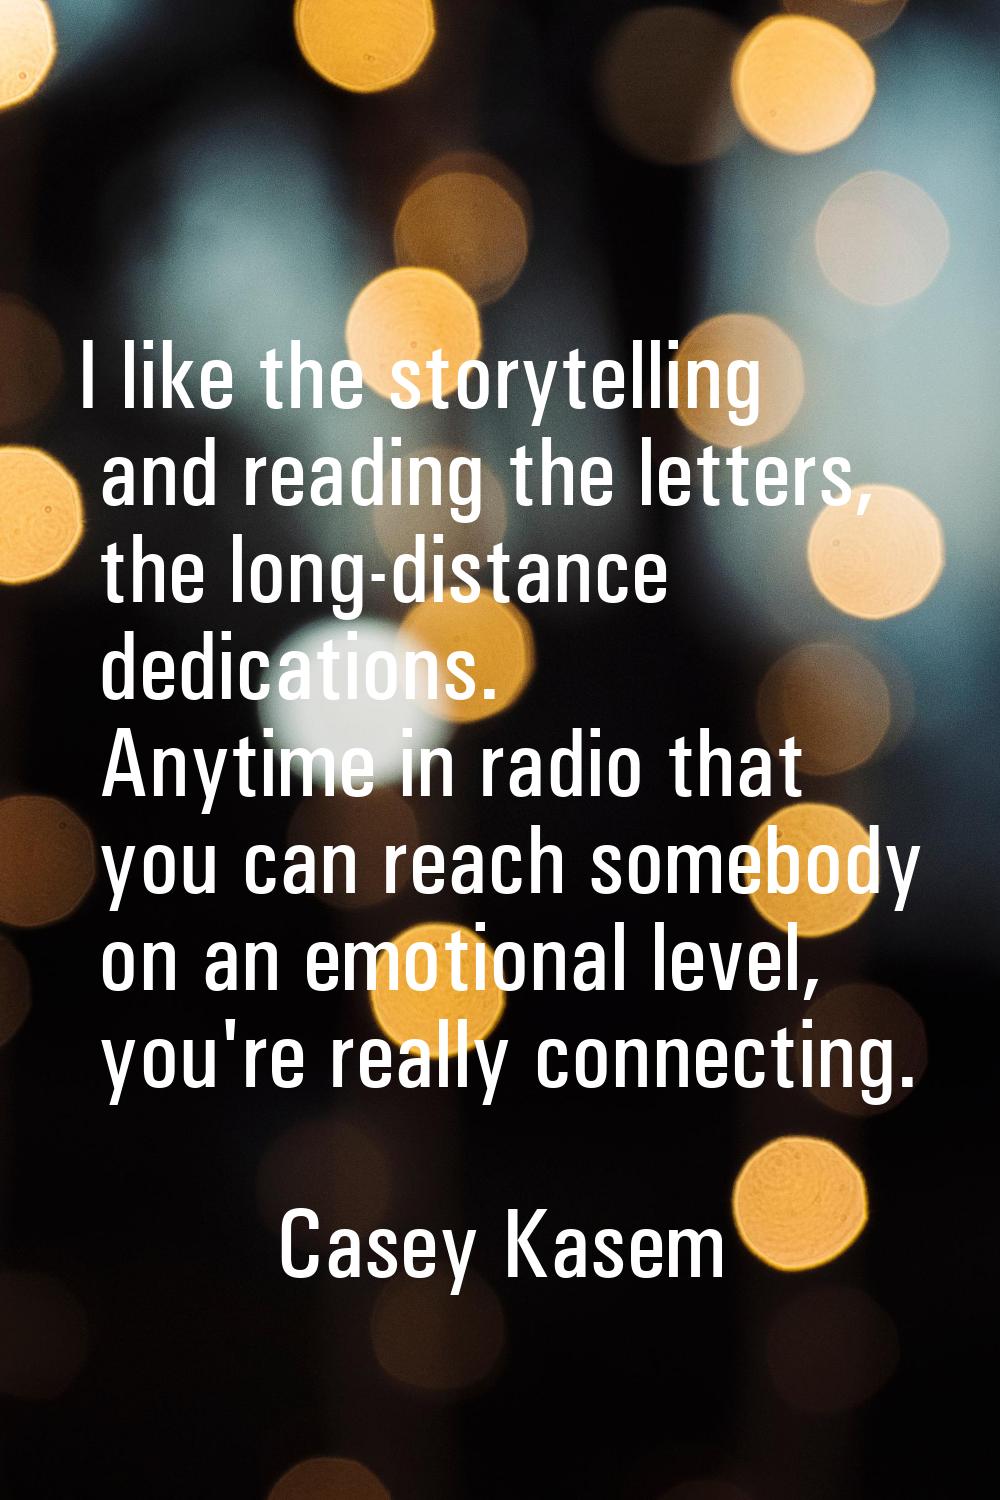 I like the storytelling and reading the letters, the long-distance dedications. Anytime in radio th